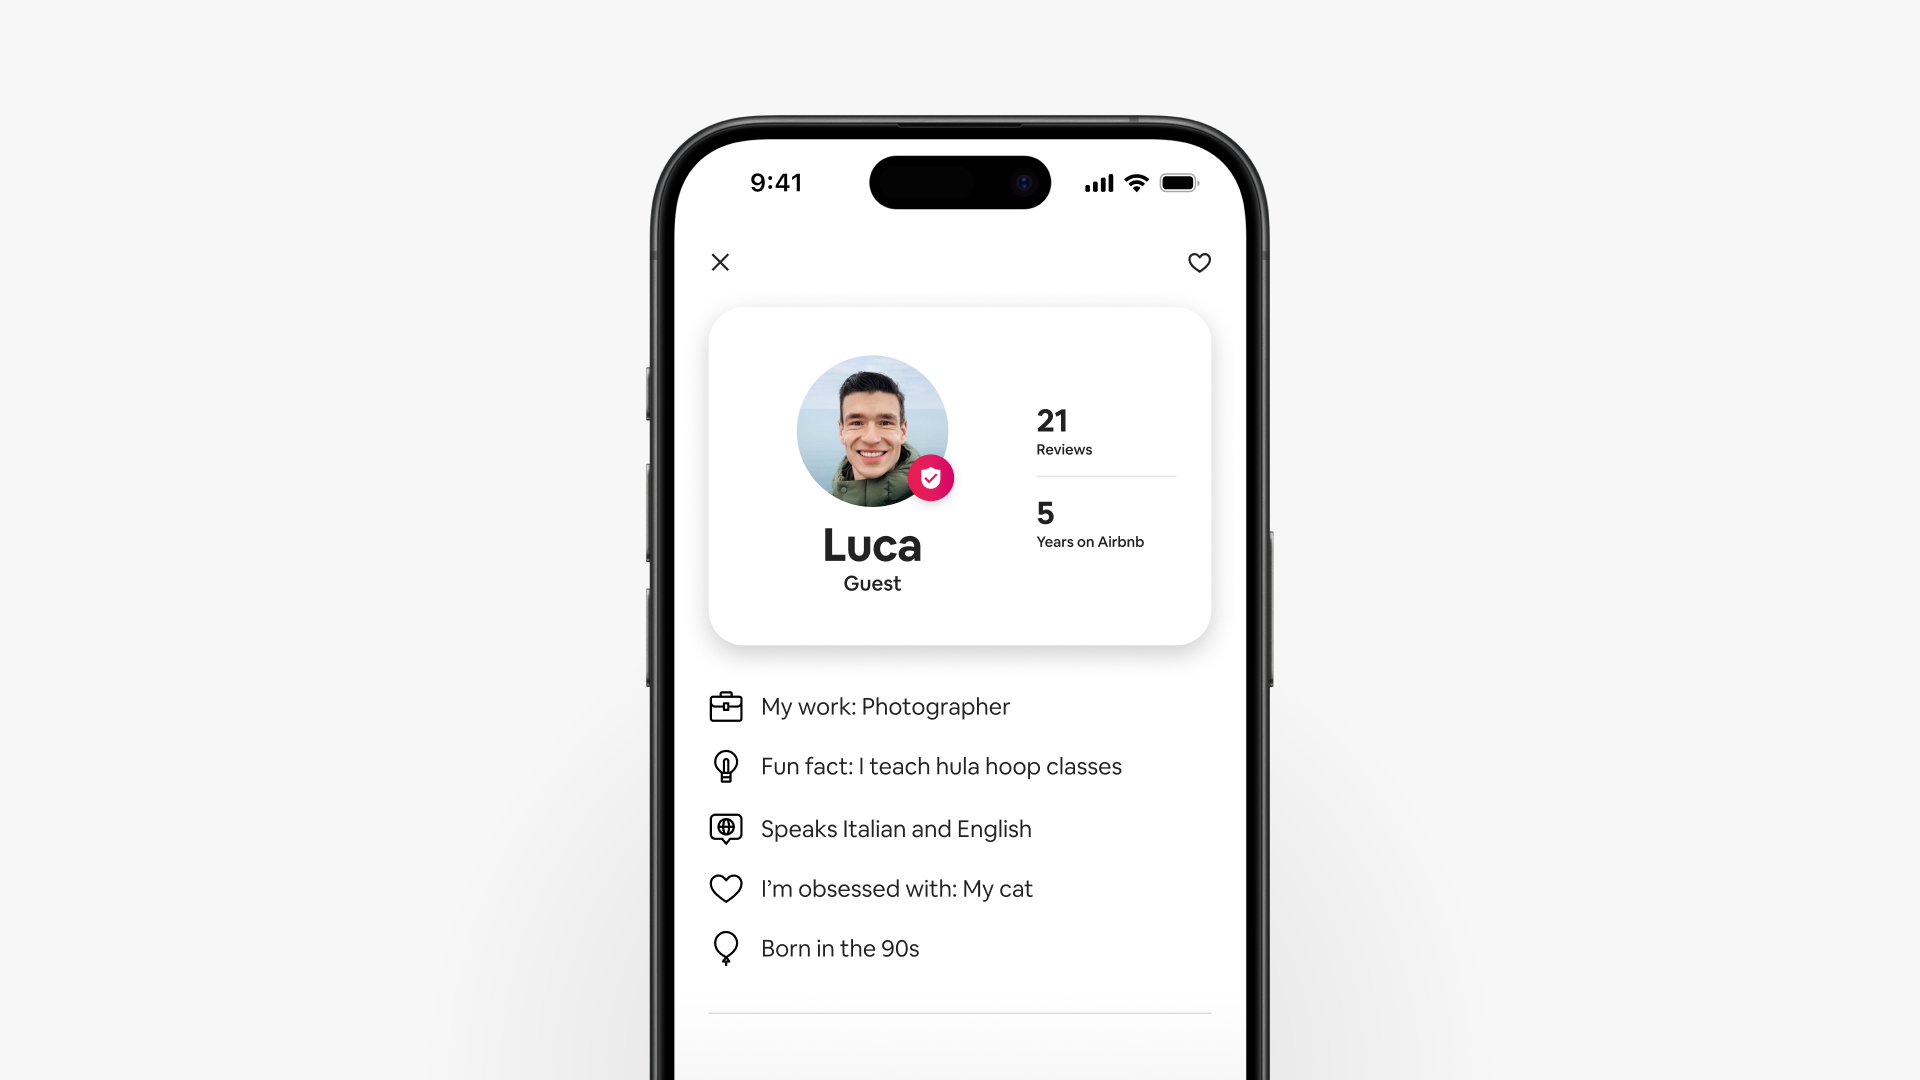 A screenshot of a smartphone displays Luca’s upgraded Airbnb guest profile, which shows reviews and details about the guest.